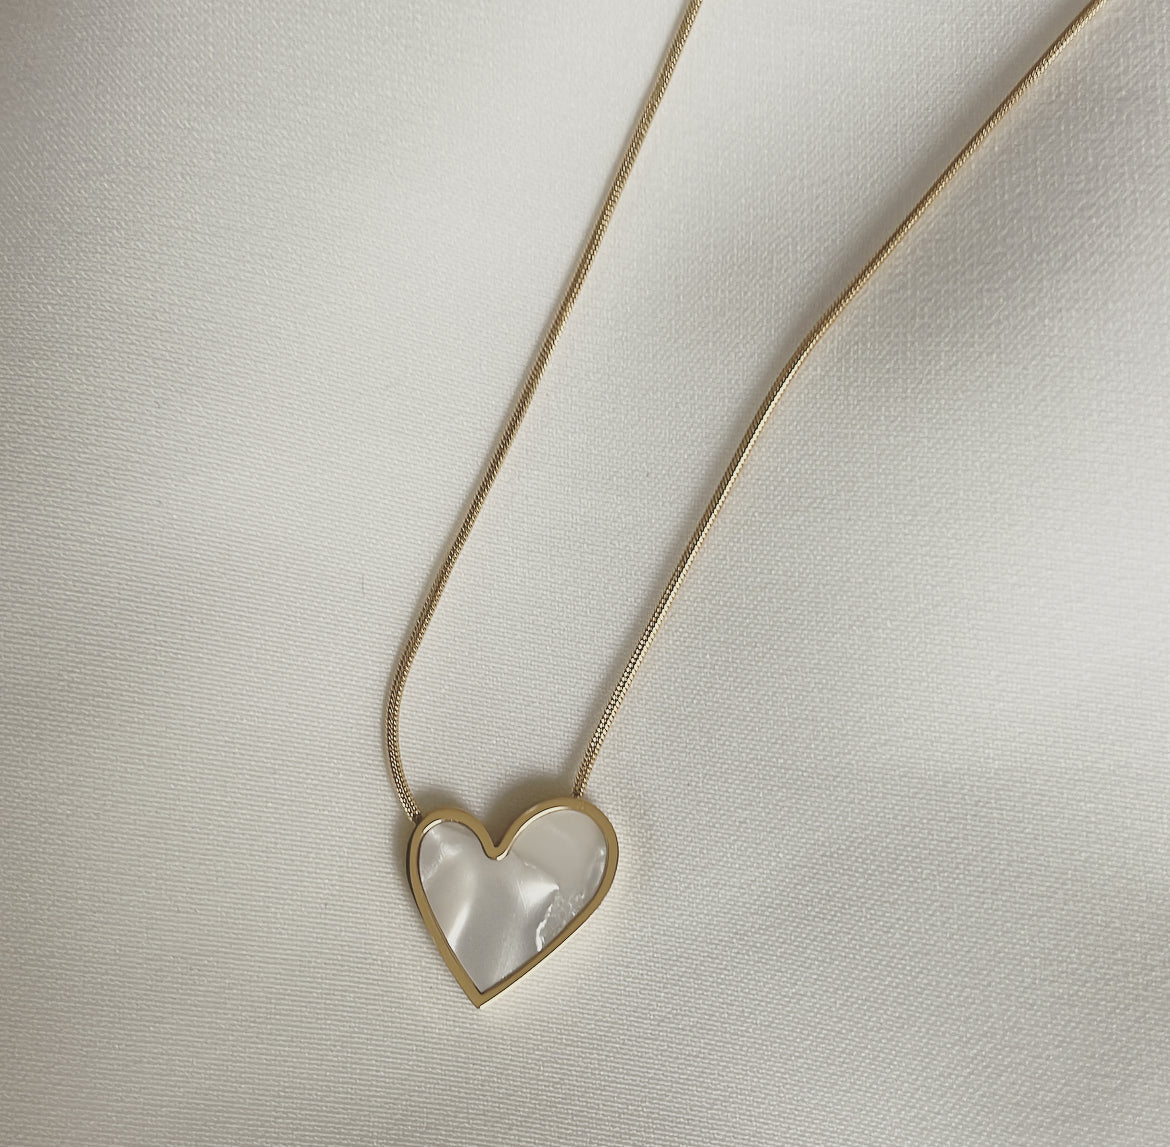 ‘FASHION HEART’ necklace pearl